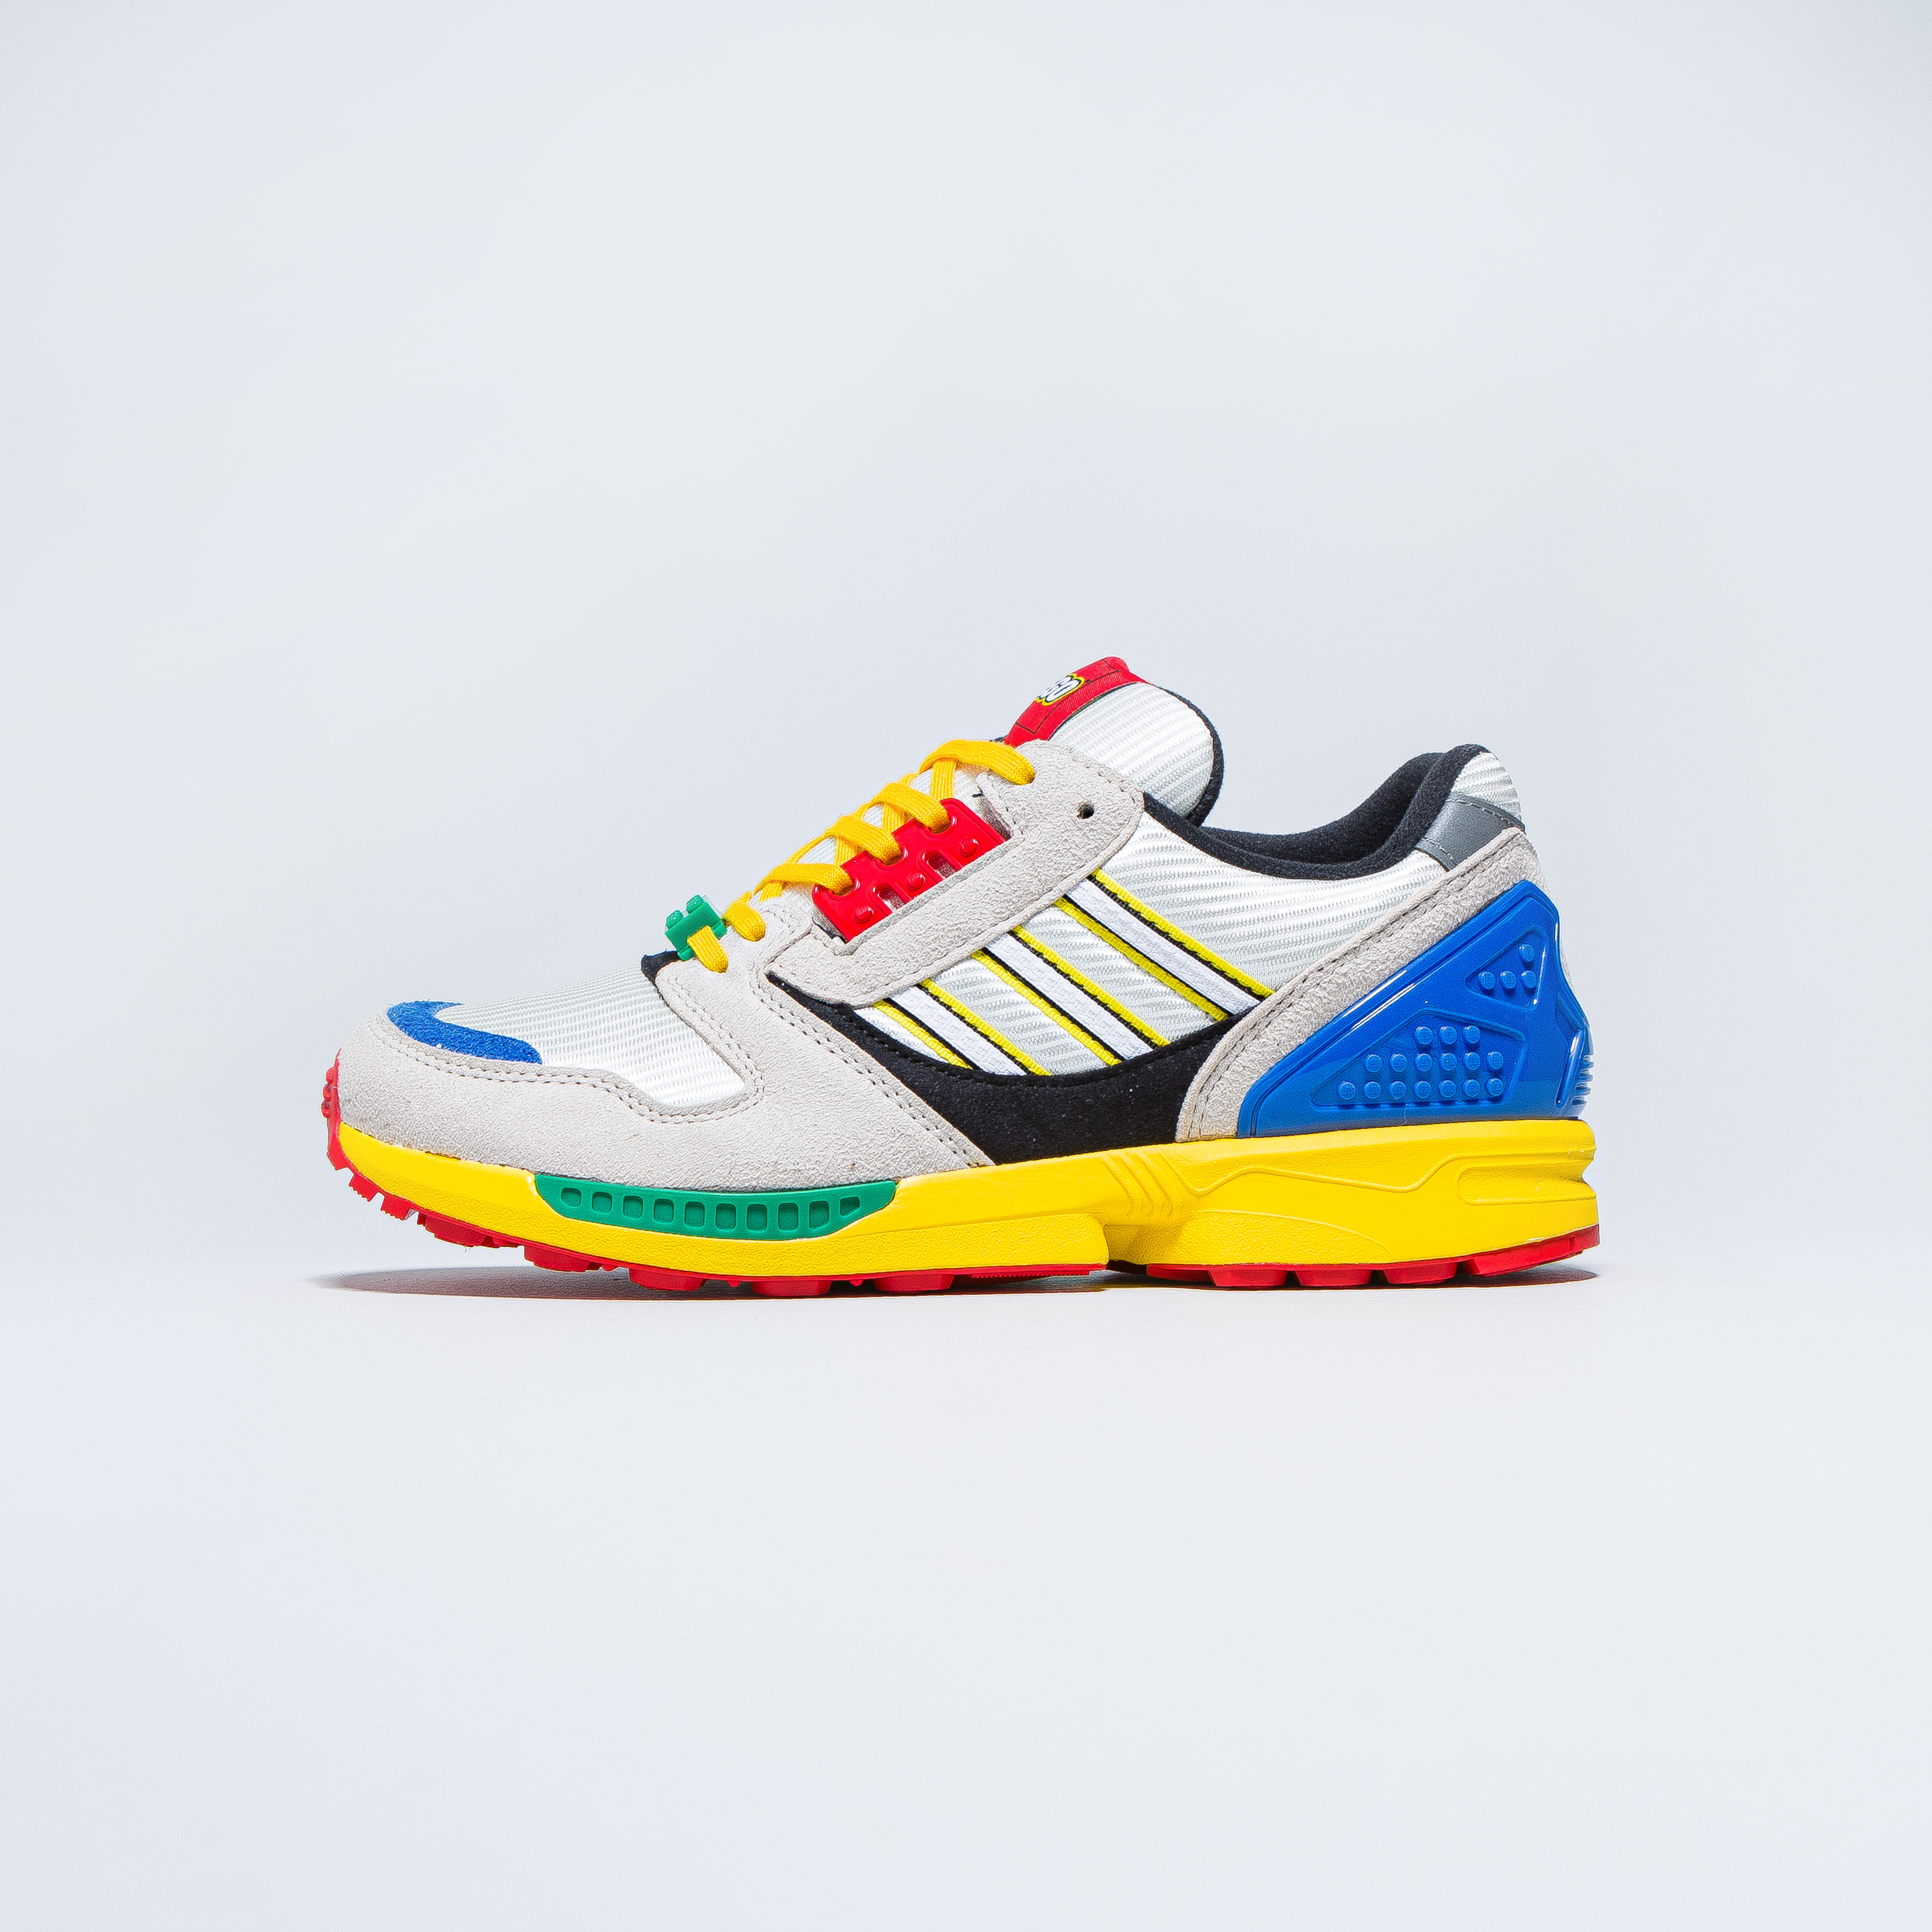 adidas - ZX 8000 x Lego - Yellow/Bliss - Up There